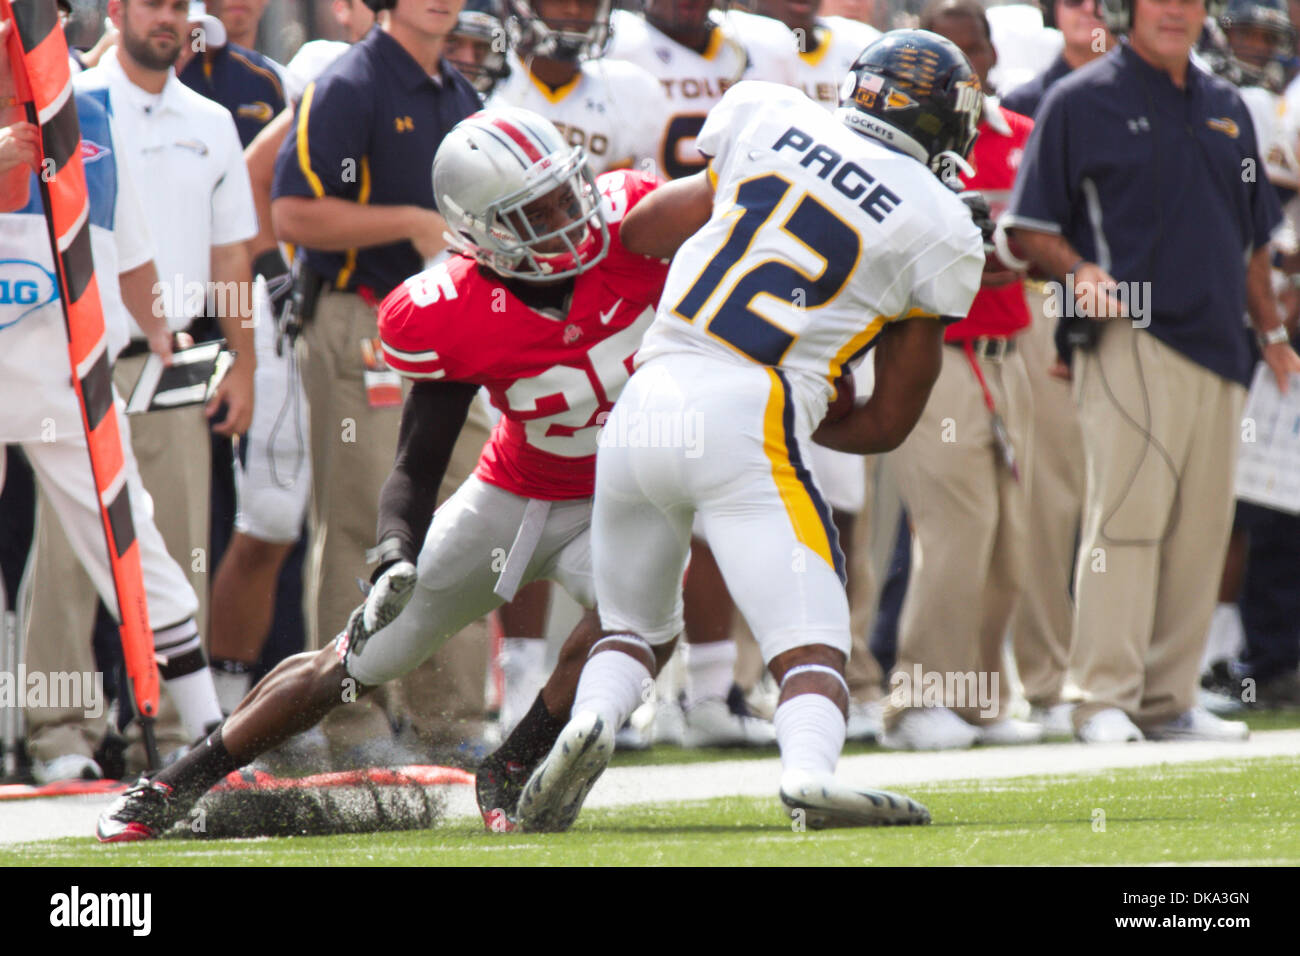 Sept. 10, 2011 - Columbus, Ohio, U.S - Ohio State Buckeyes defensive back Bradley Roby (25) wraps up Toledo Rockets wide receiver Eric Page (12) after a pass during the first quarter of the game between Toledo and Ohio State at Ohio Stadium, Columbus, Ohio. Ohio State defeated Toledo 27-22. (Credit Image: © Scott Stuart/Southcreek Global/ZUMAPRESS.com) Stock Photo